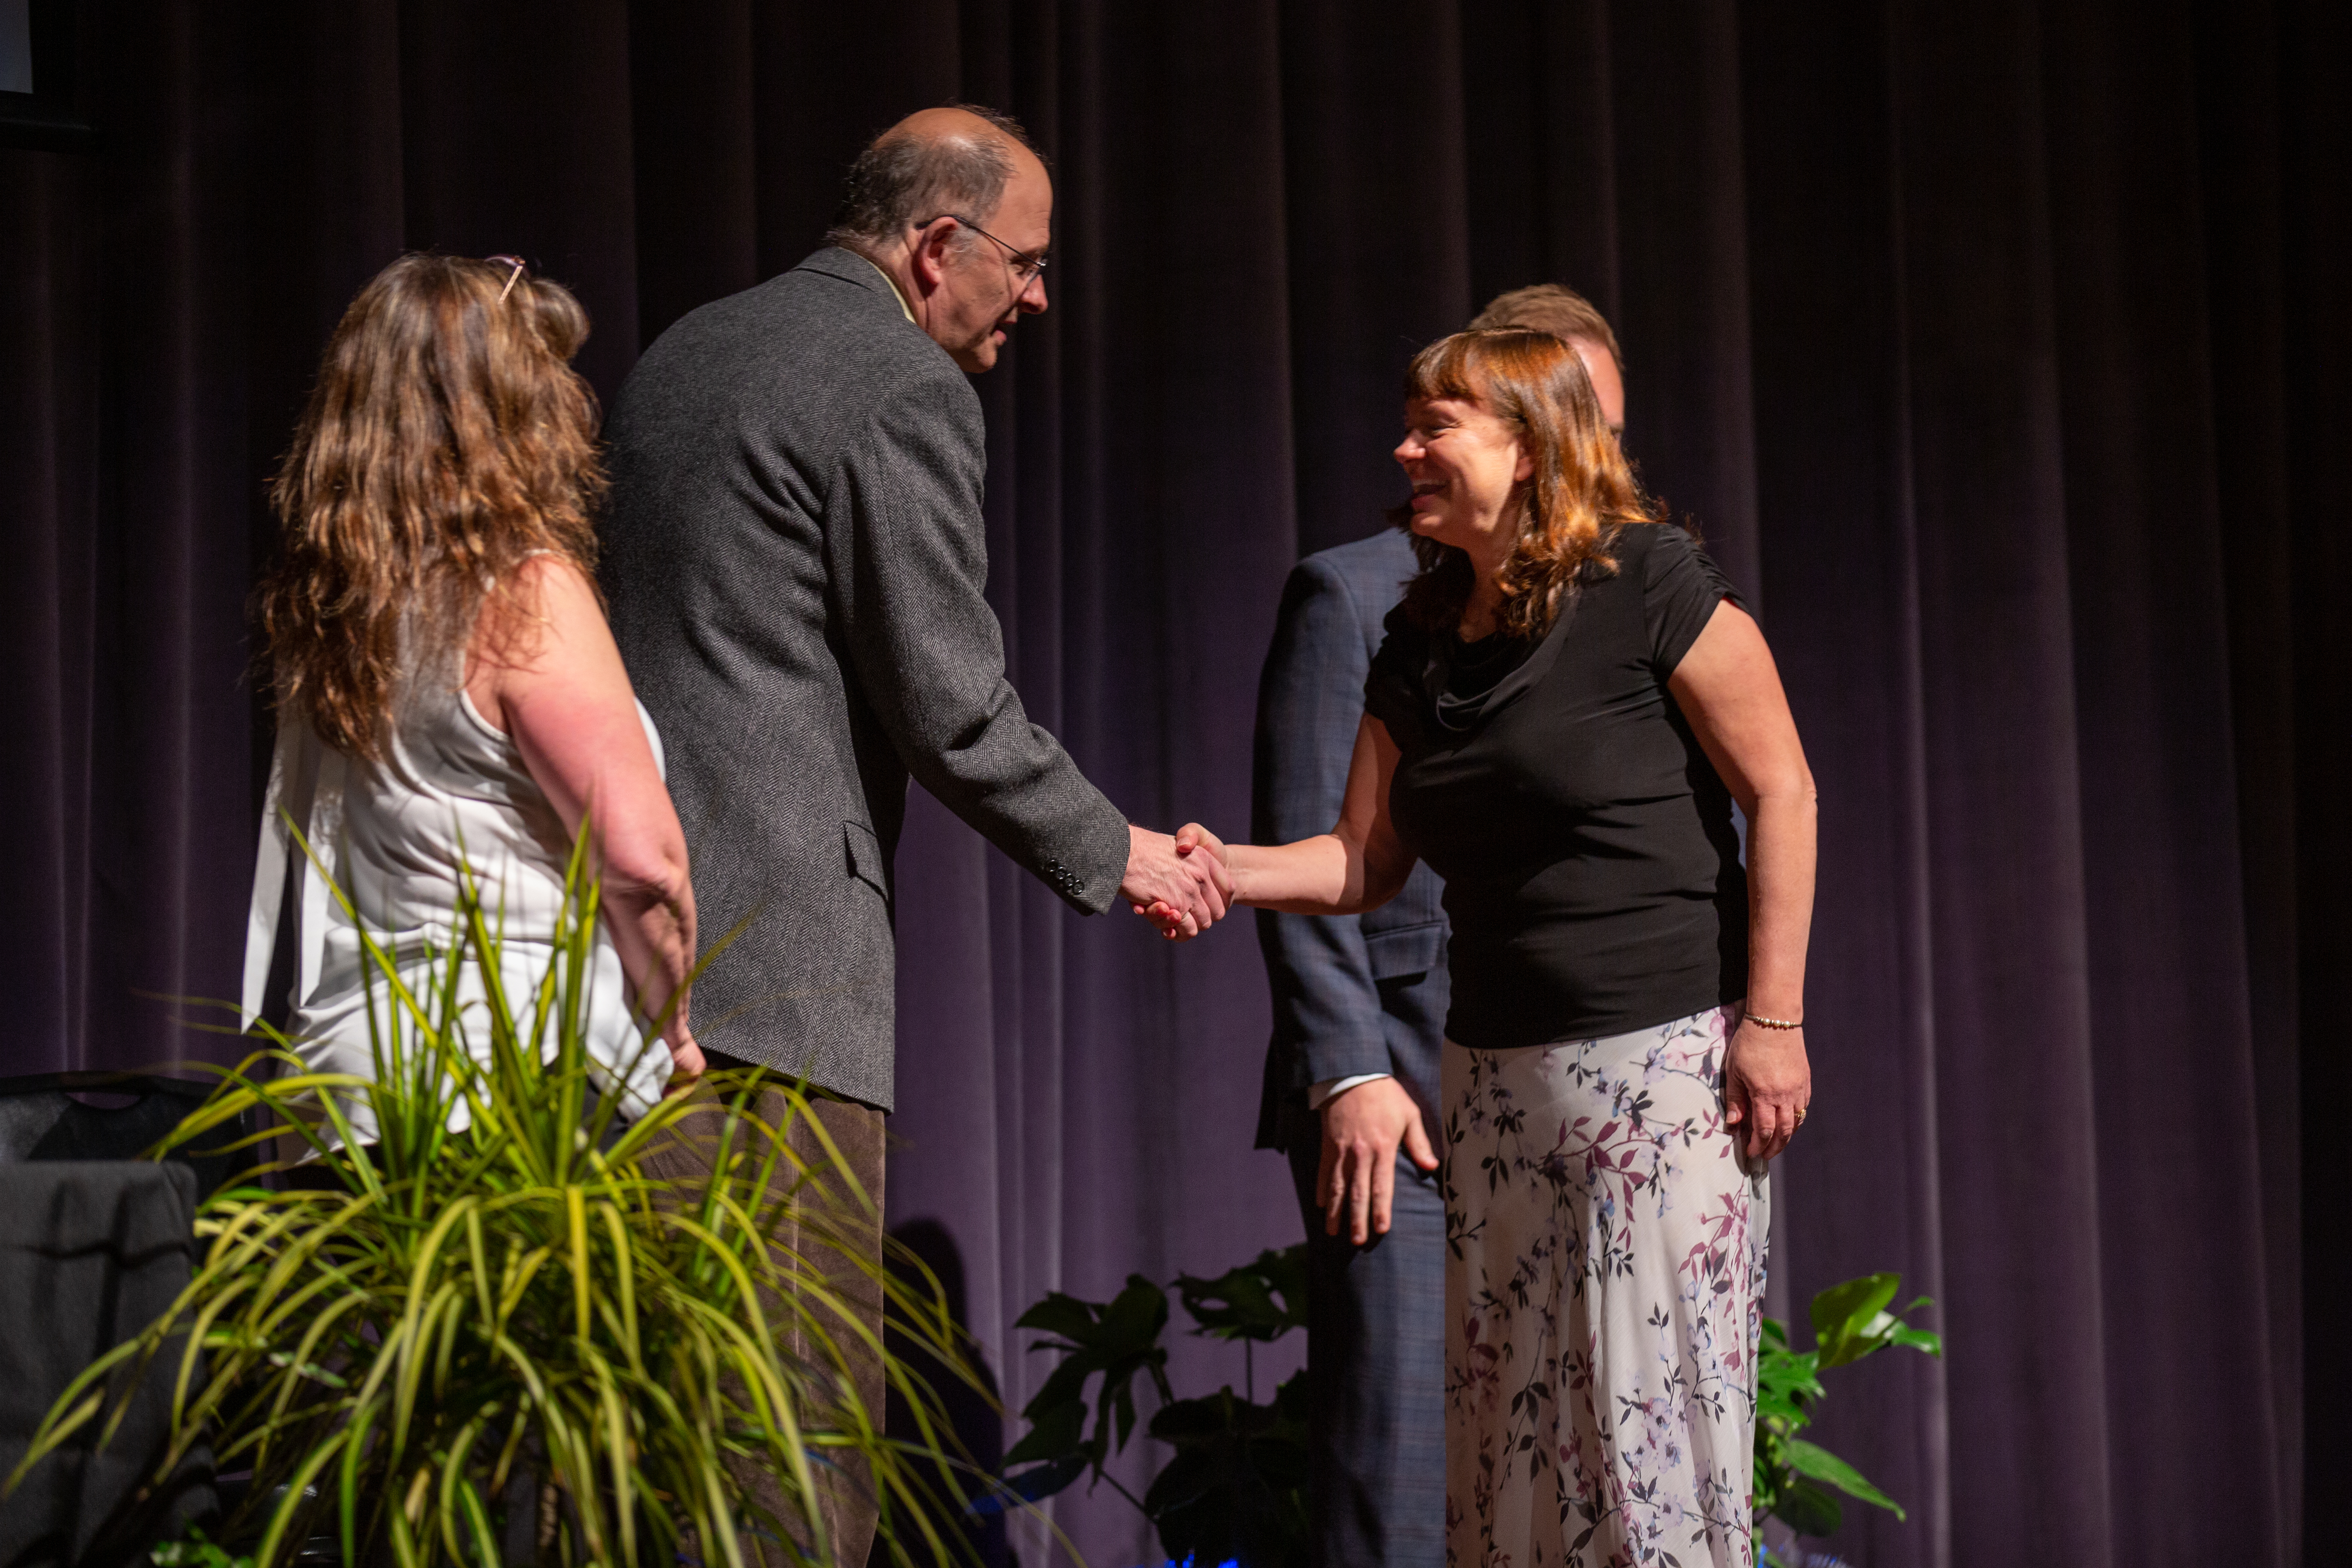 PSD staff member is celebrated at an awards ceremony.